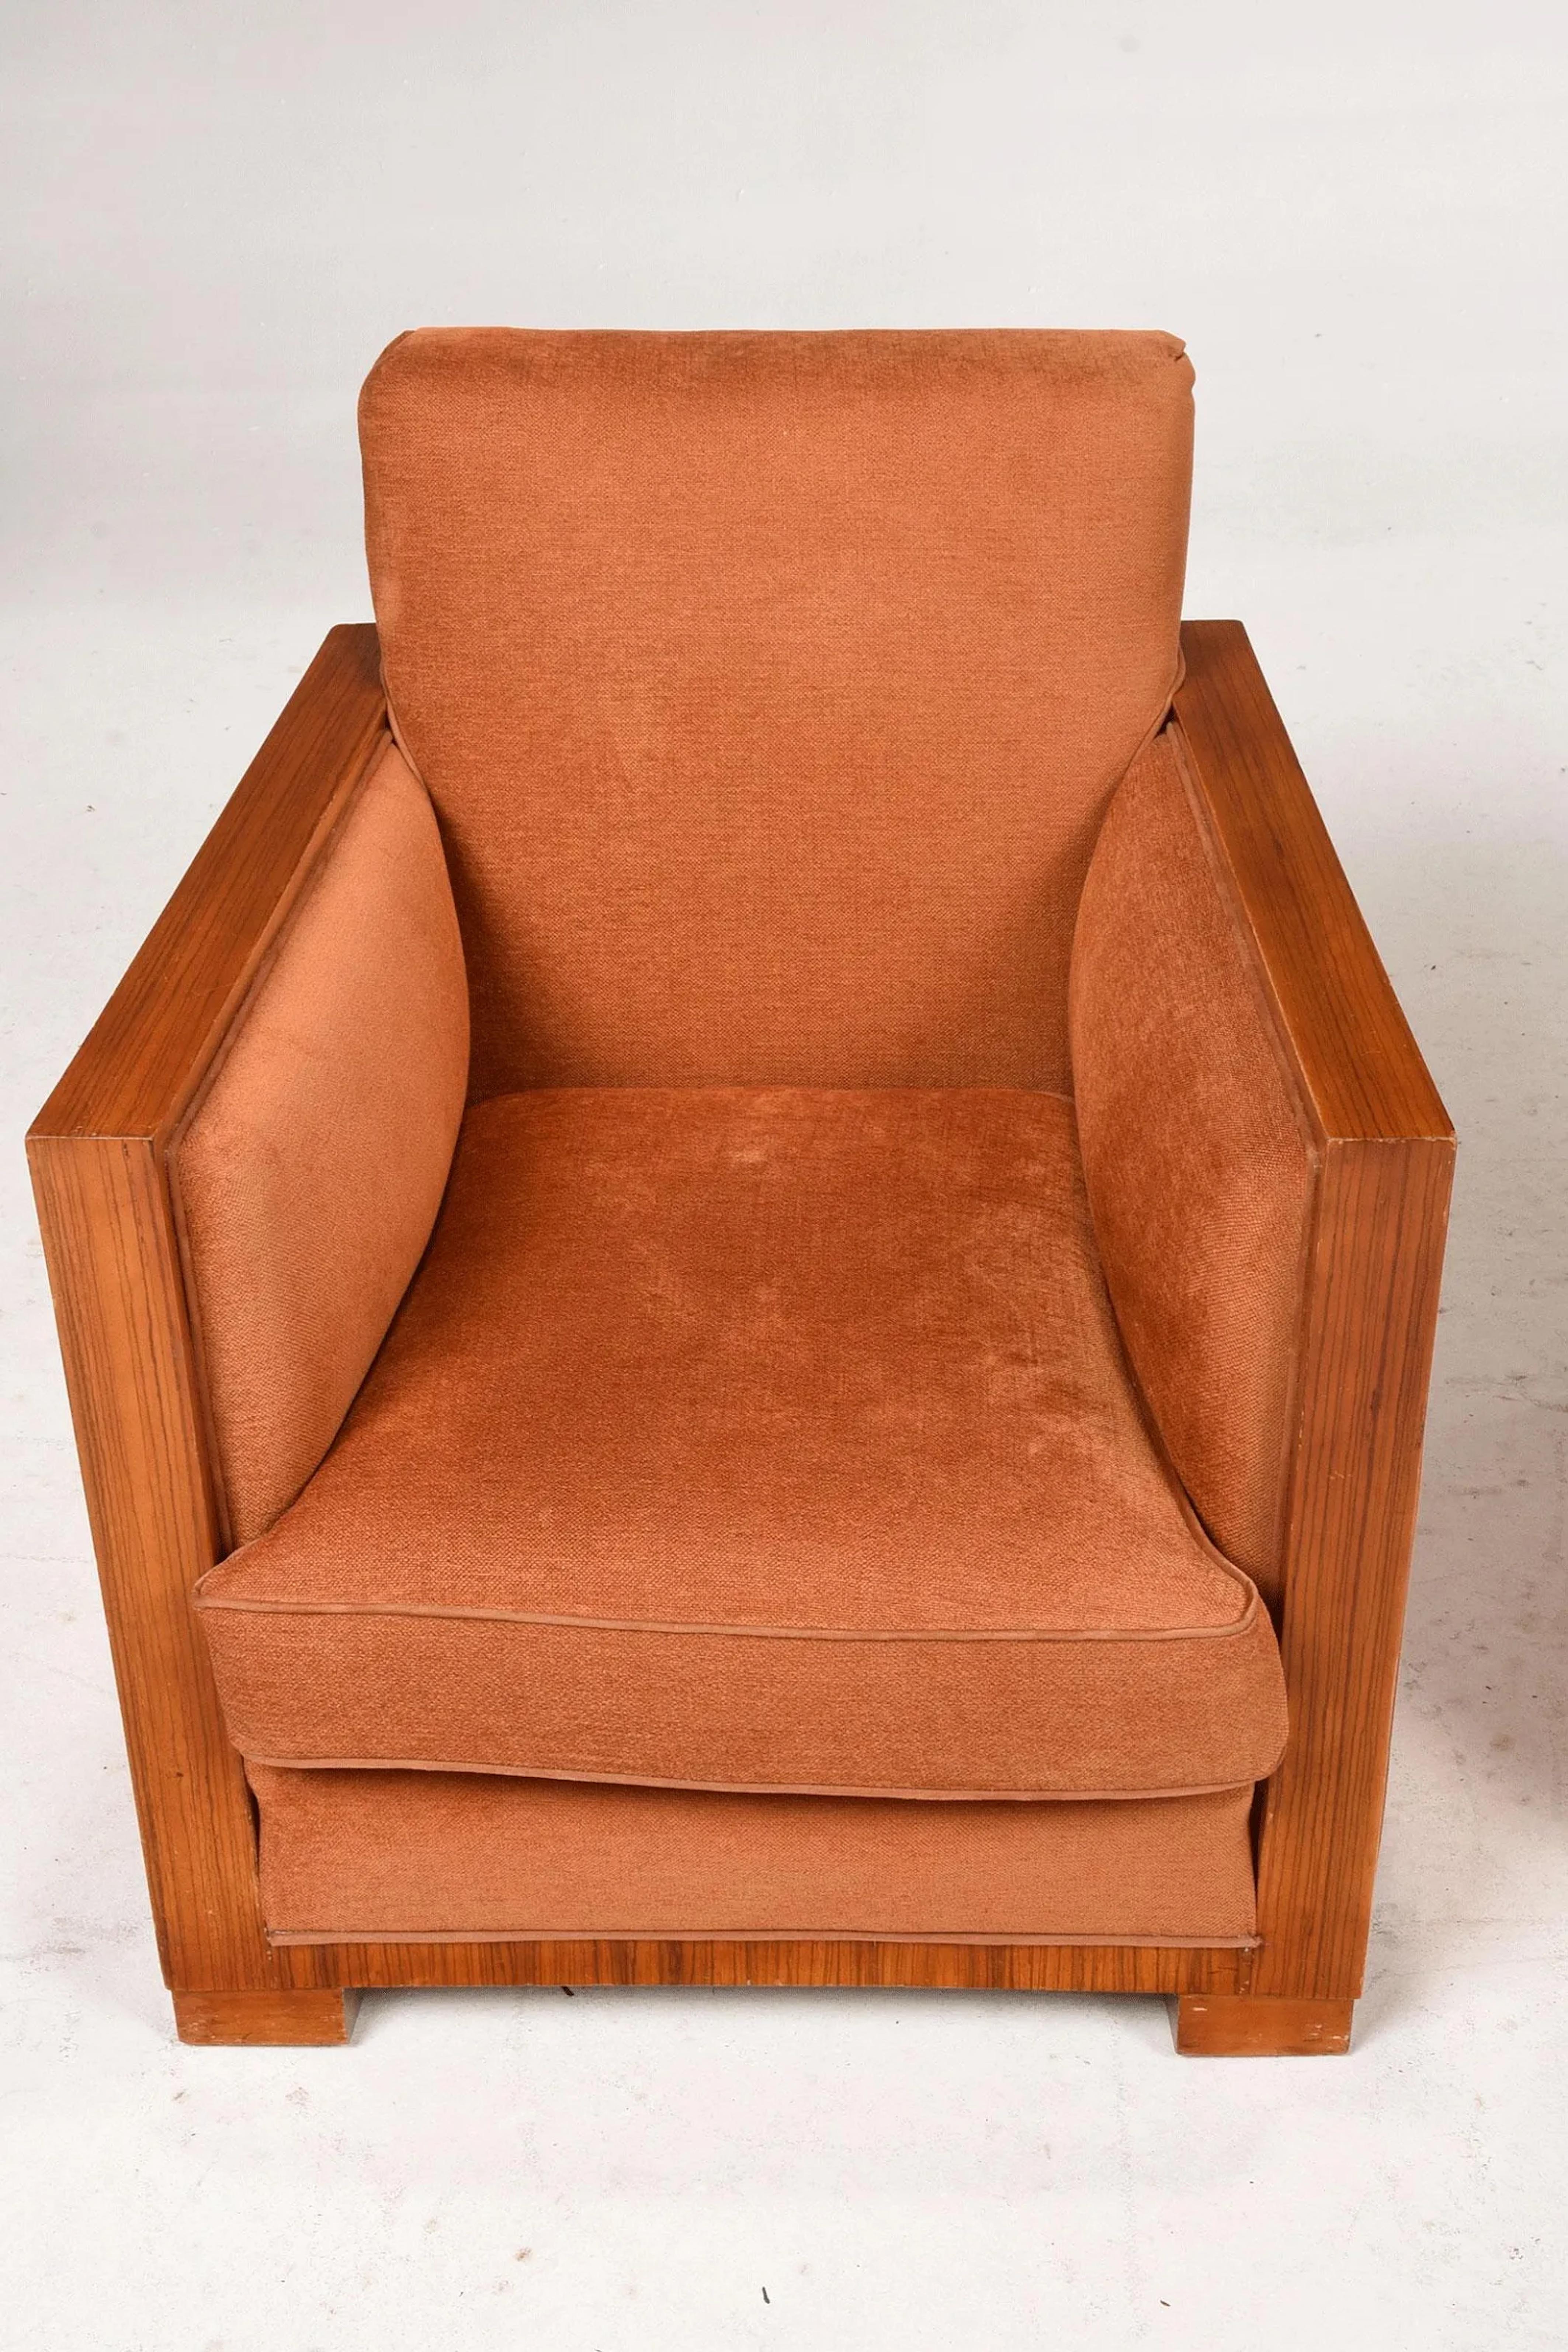 Pair French Art Deco Period walnut Armchairs decorated with a rust color velvet upholstery.
Provenance: Christie's New York, June 9, 1998 (lot 155) Eli and Edythe Broad; Private Collection, New York